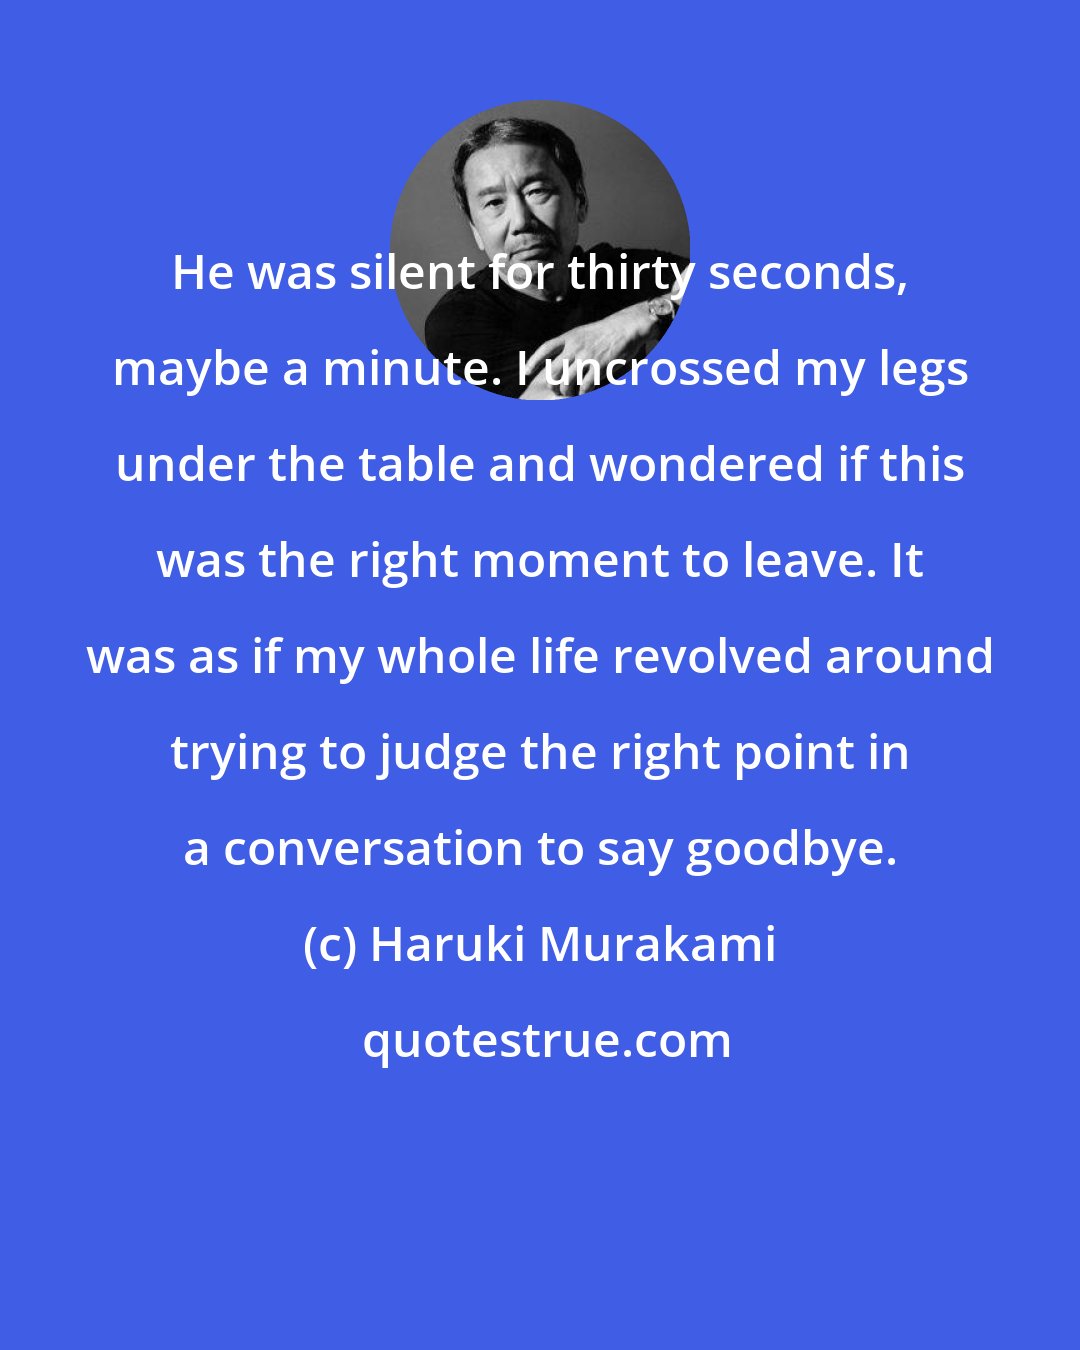 Haruki Murakami: He was silent for thirty seconds, maybe a minute. I uncrossed my legs under the table and wondered if this was the right moment to leave. It was as if my whole life revolved around trying to judge the right point in a conversation to say goodbye.